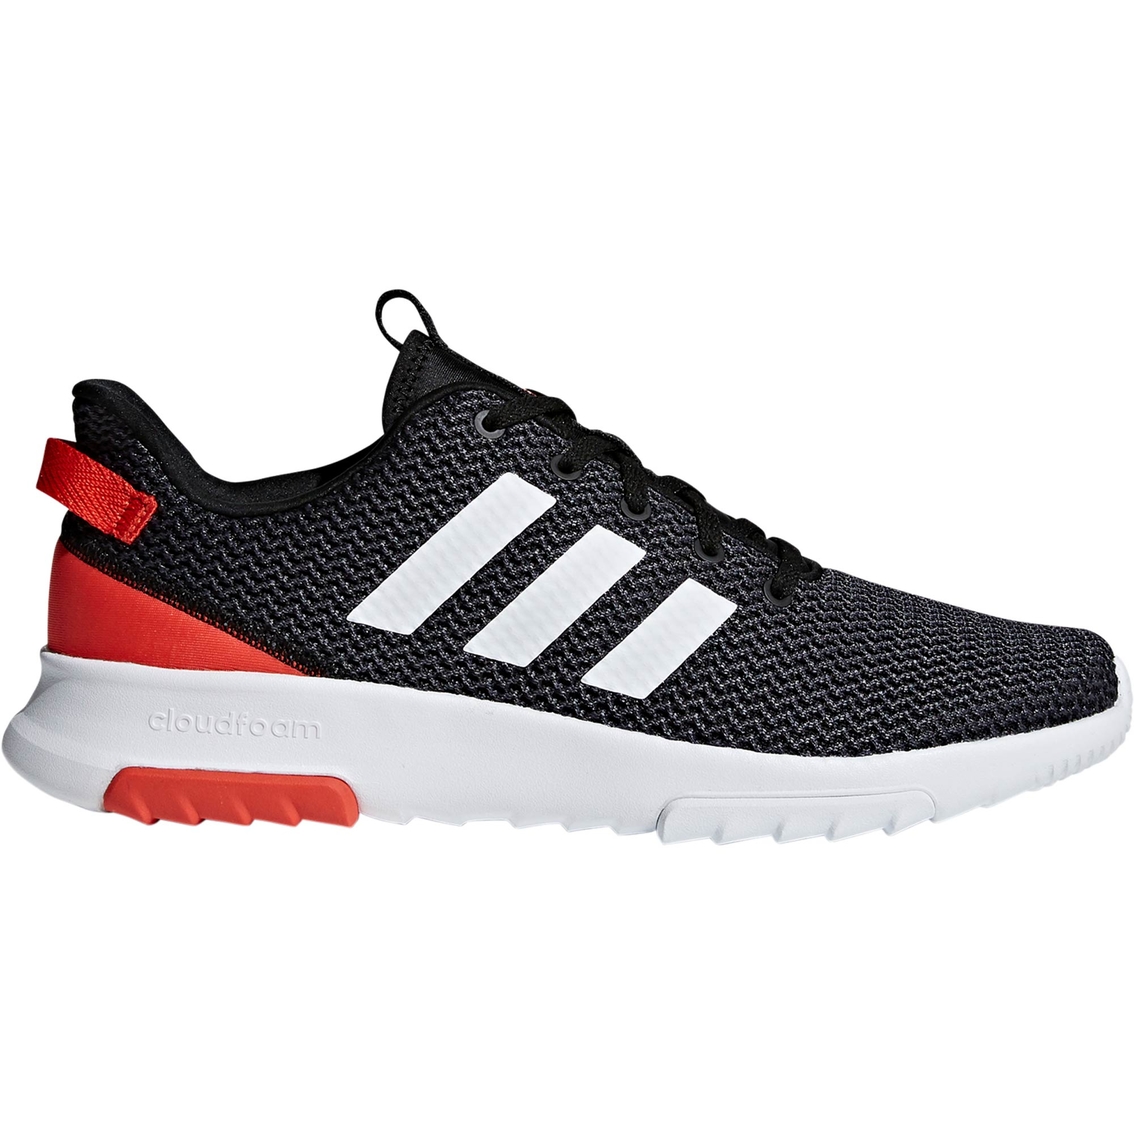 Adidas Men's Cloudfoam Racer Tr Shoes | Hiking & Trail | Father's ...